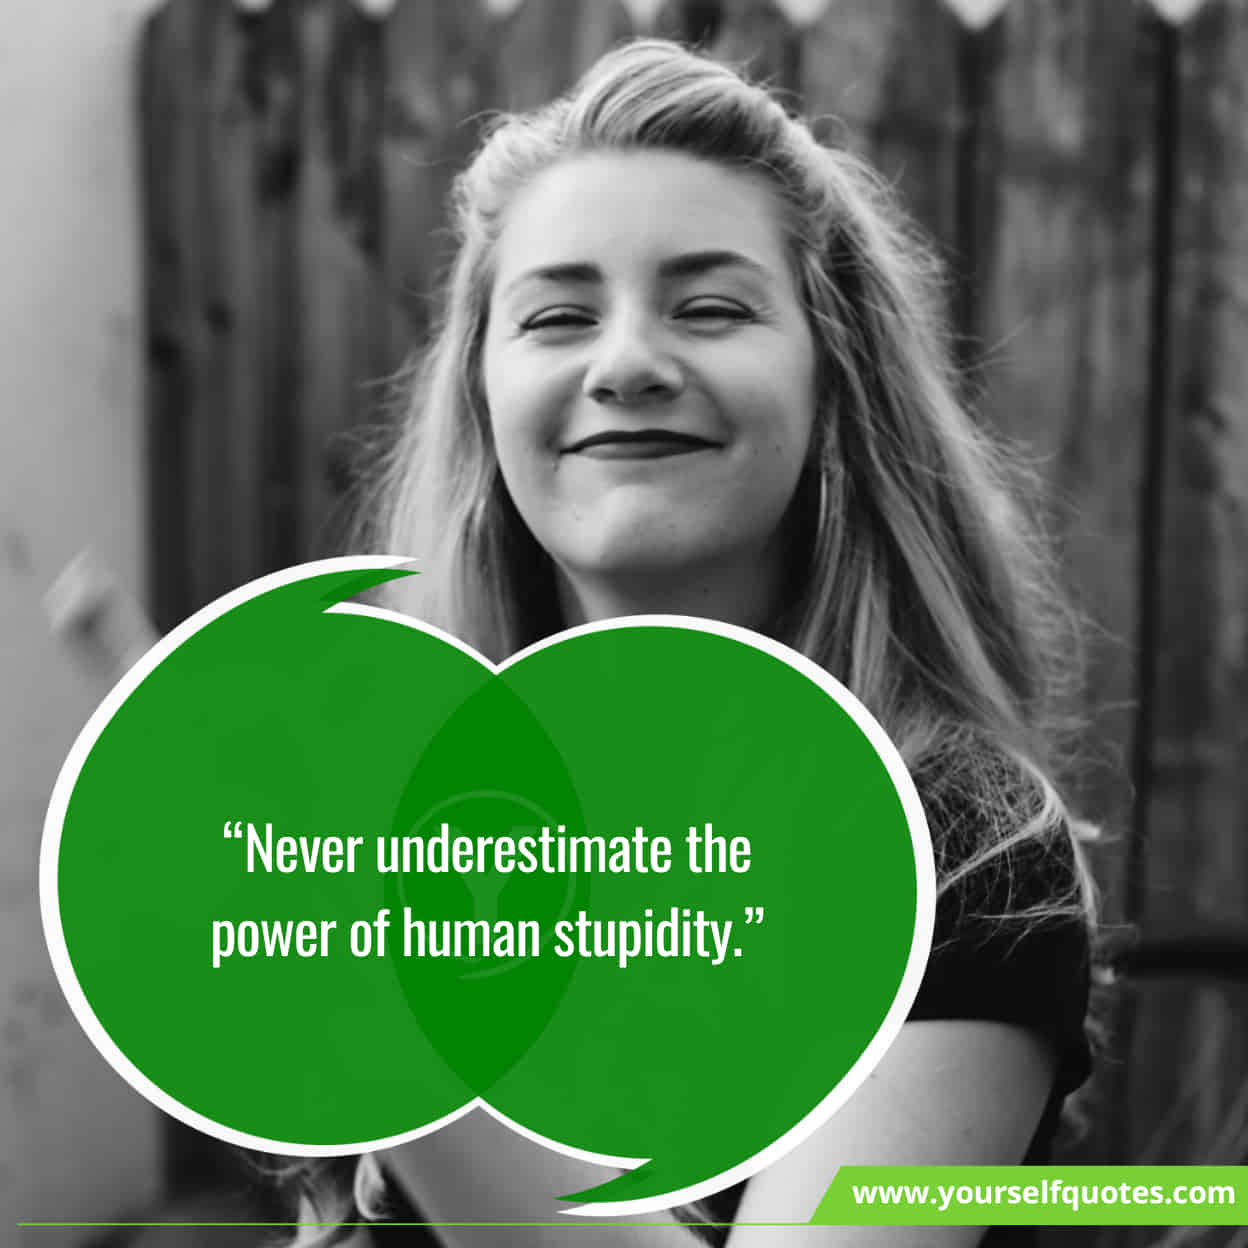 Best Funny Quotes On Stupid